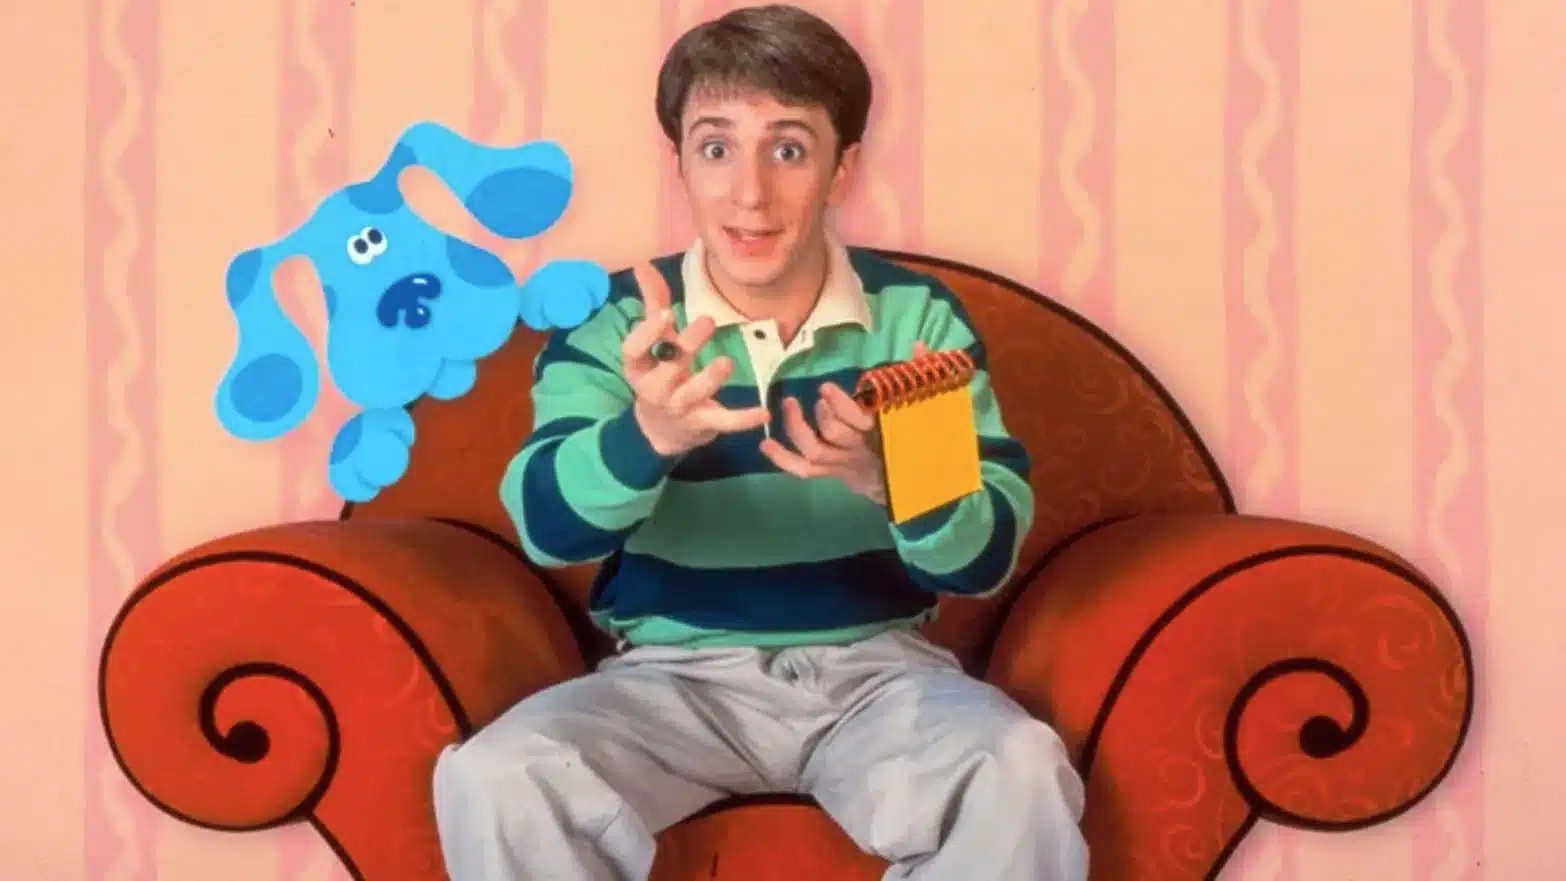 From brand persona to brand loyalty: Experiences in videos, VR and on TV. Challenging your senses as illustrated by a scene from the tv show Blues Clues.